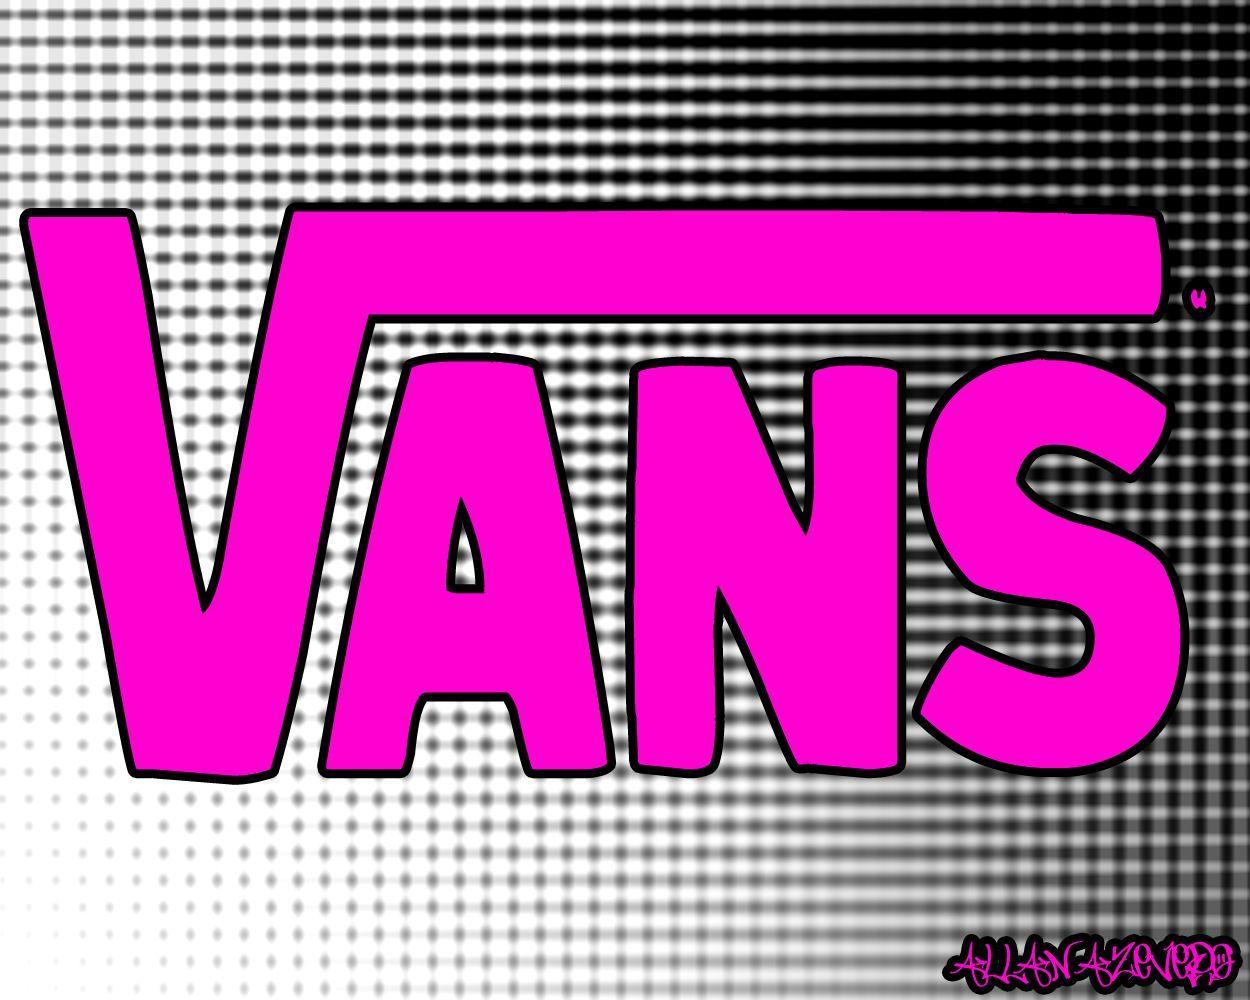 Pink Vans Logo - Cool Vans Logo pink | Vans Logo Wallpaper Pink Images & Pictures ...